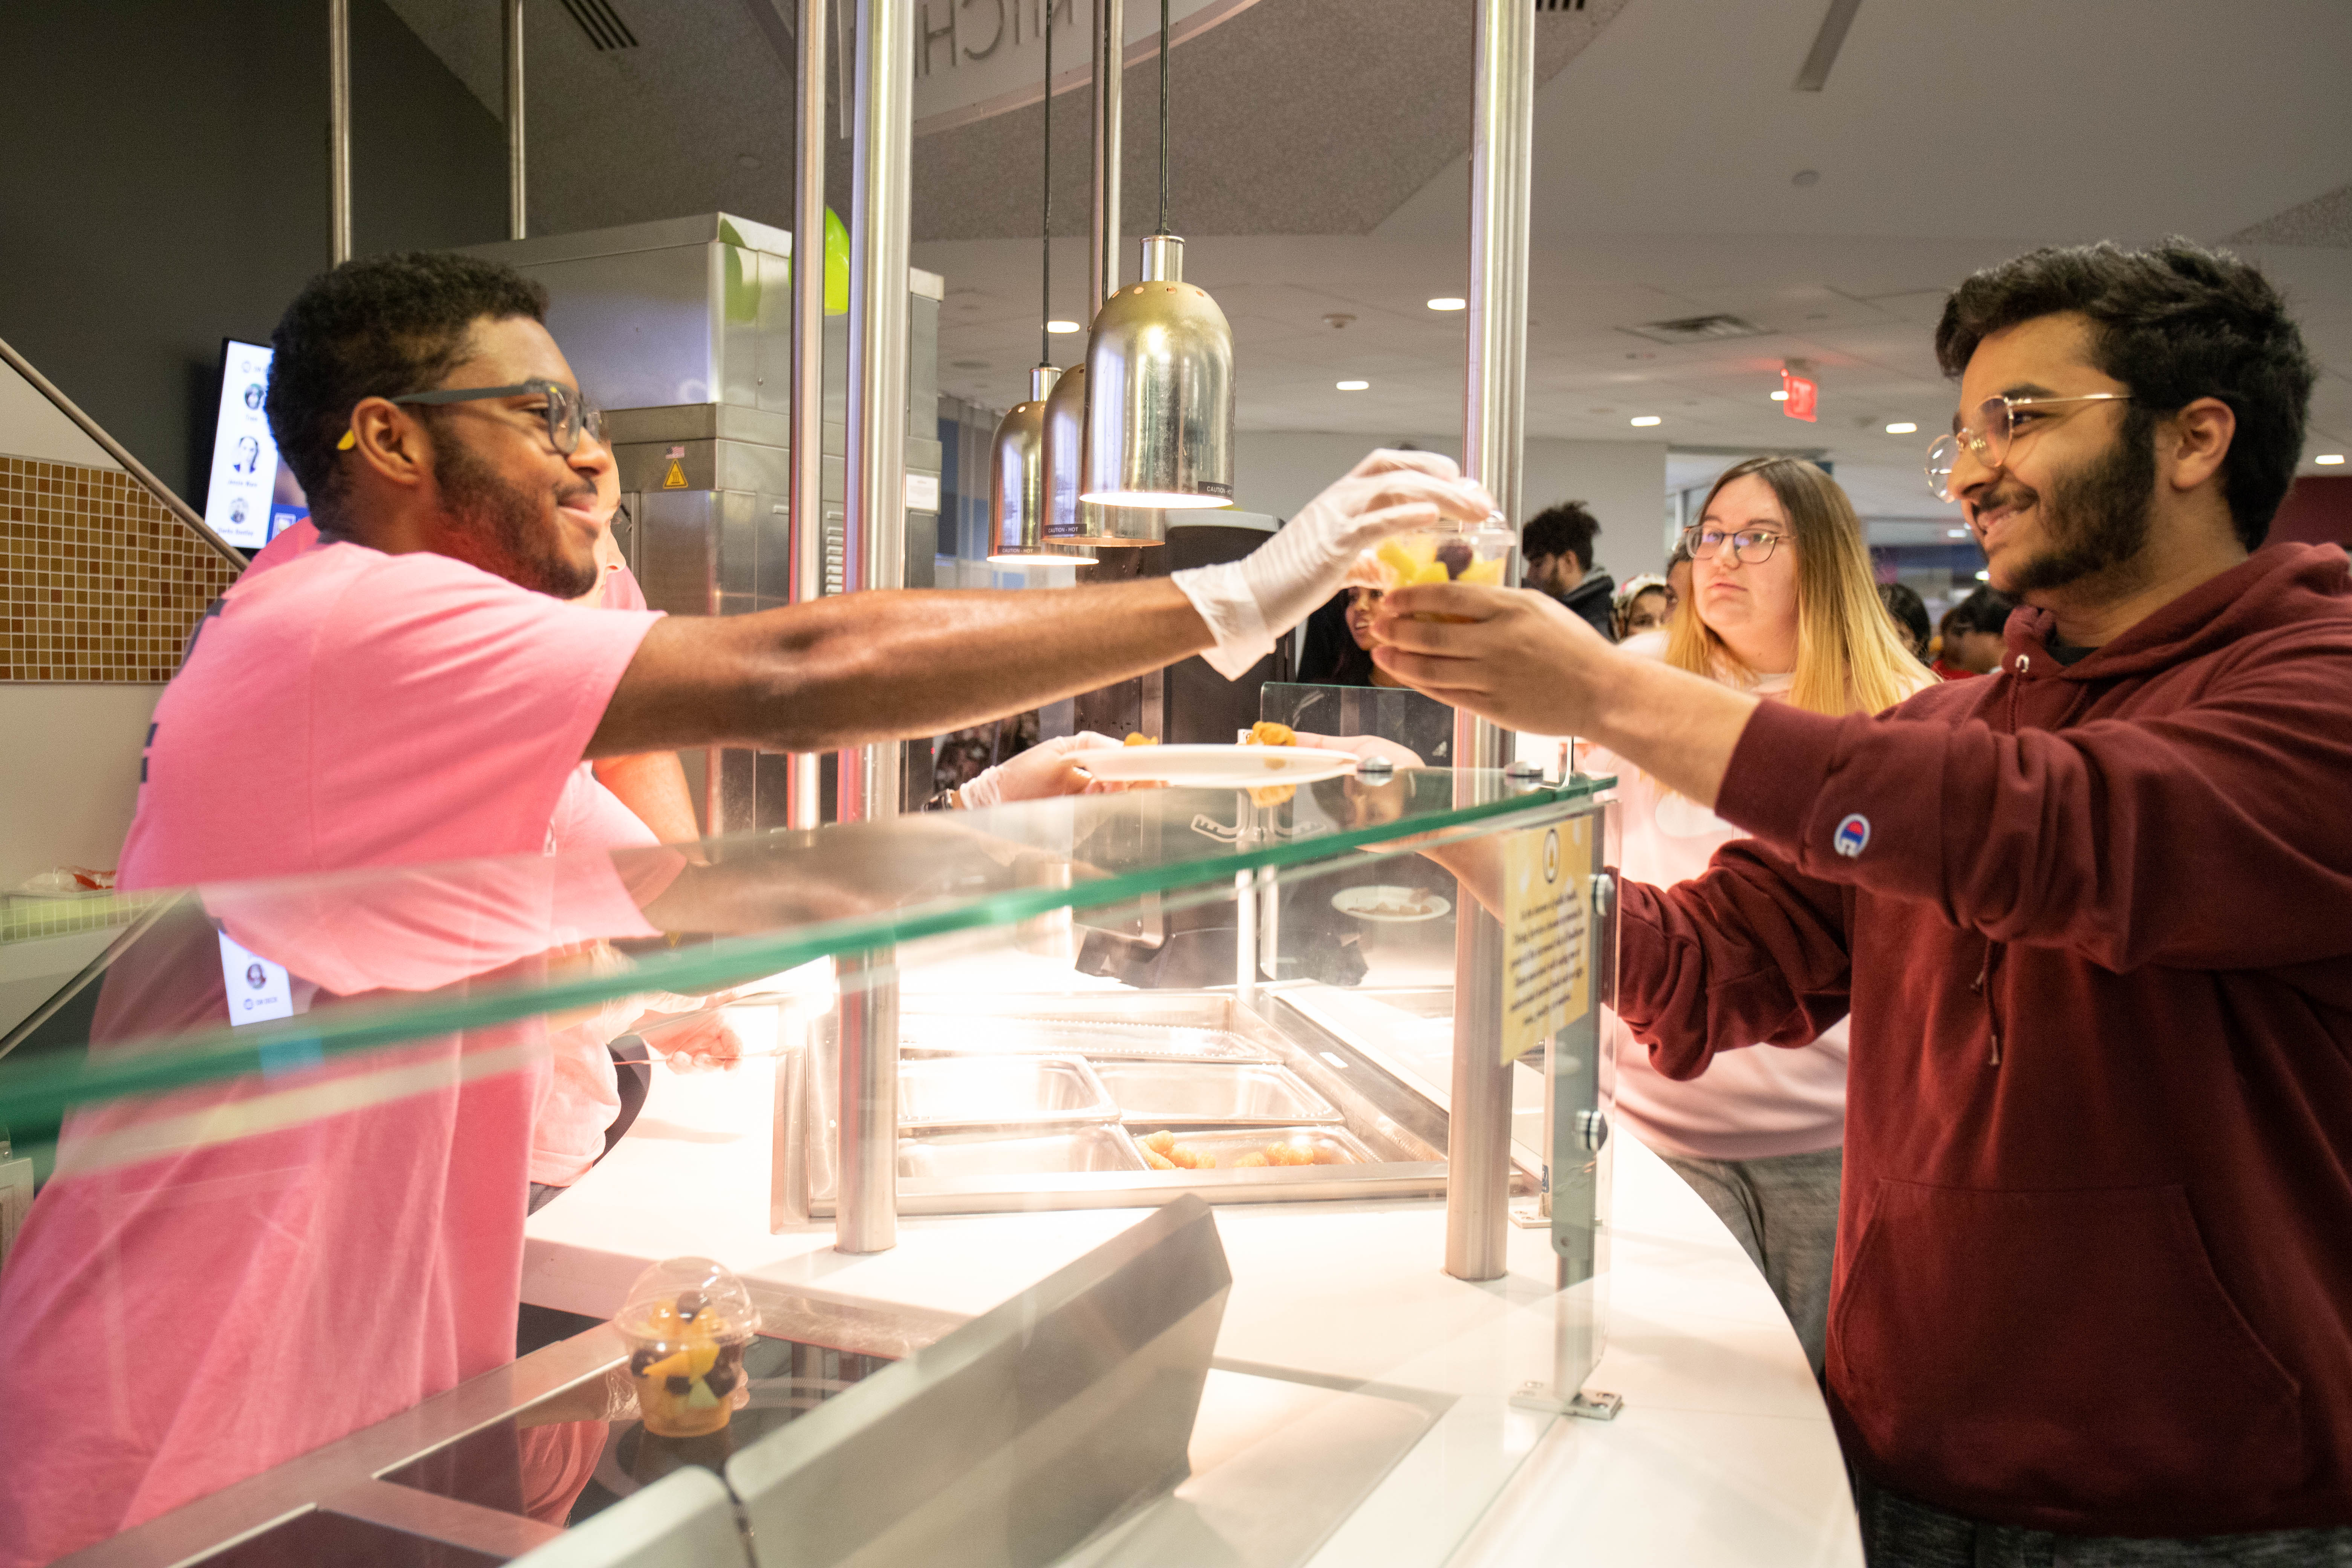 A student grabs a late night snack from volunteer in dining hall